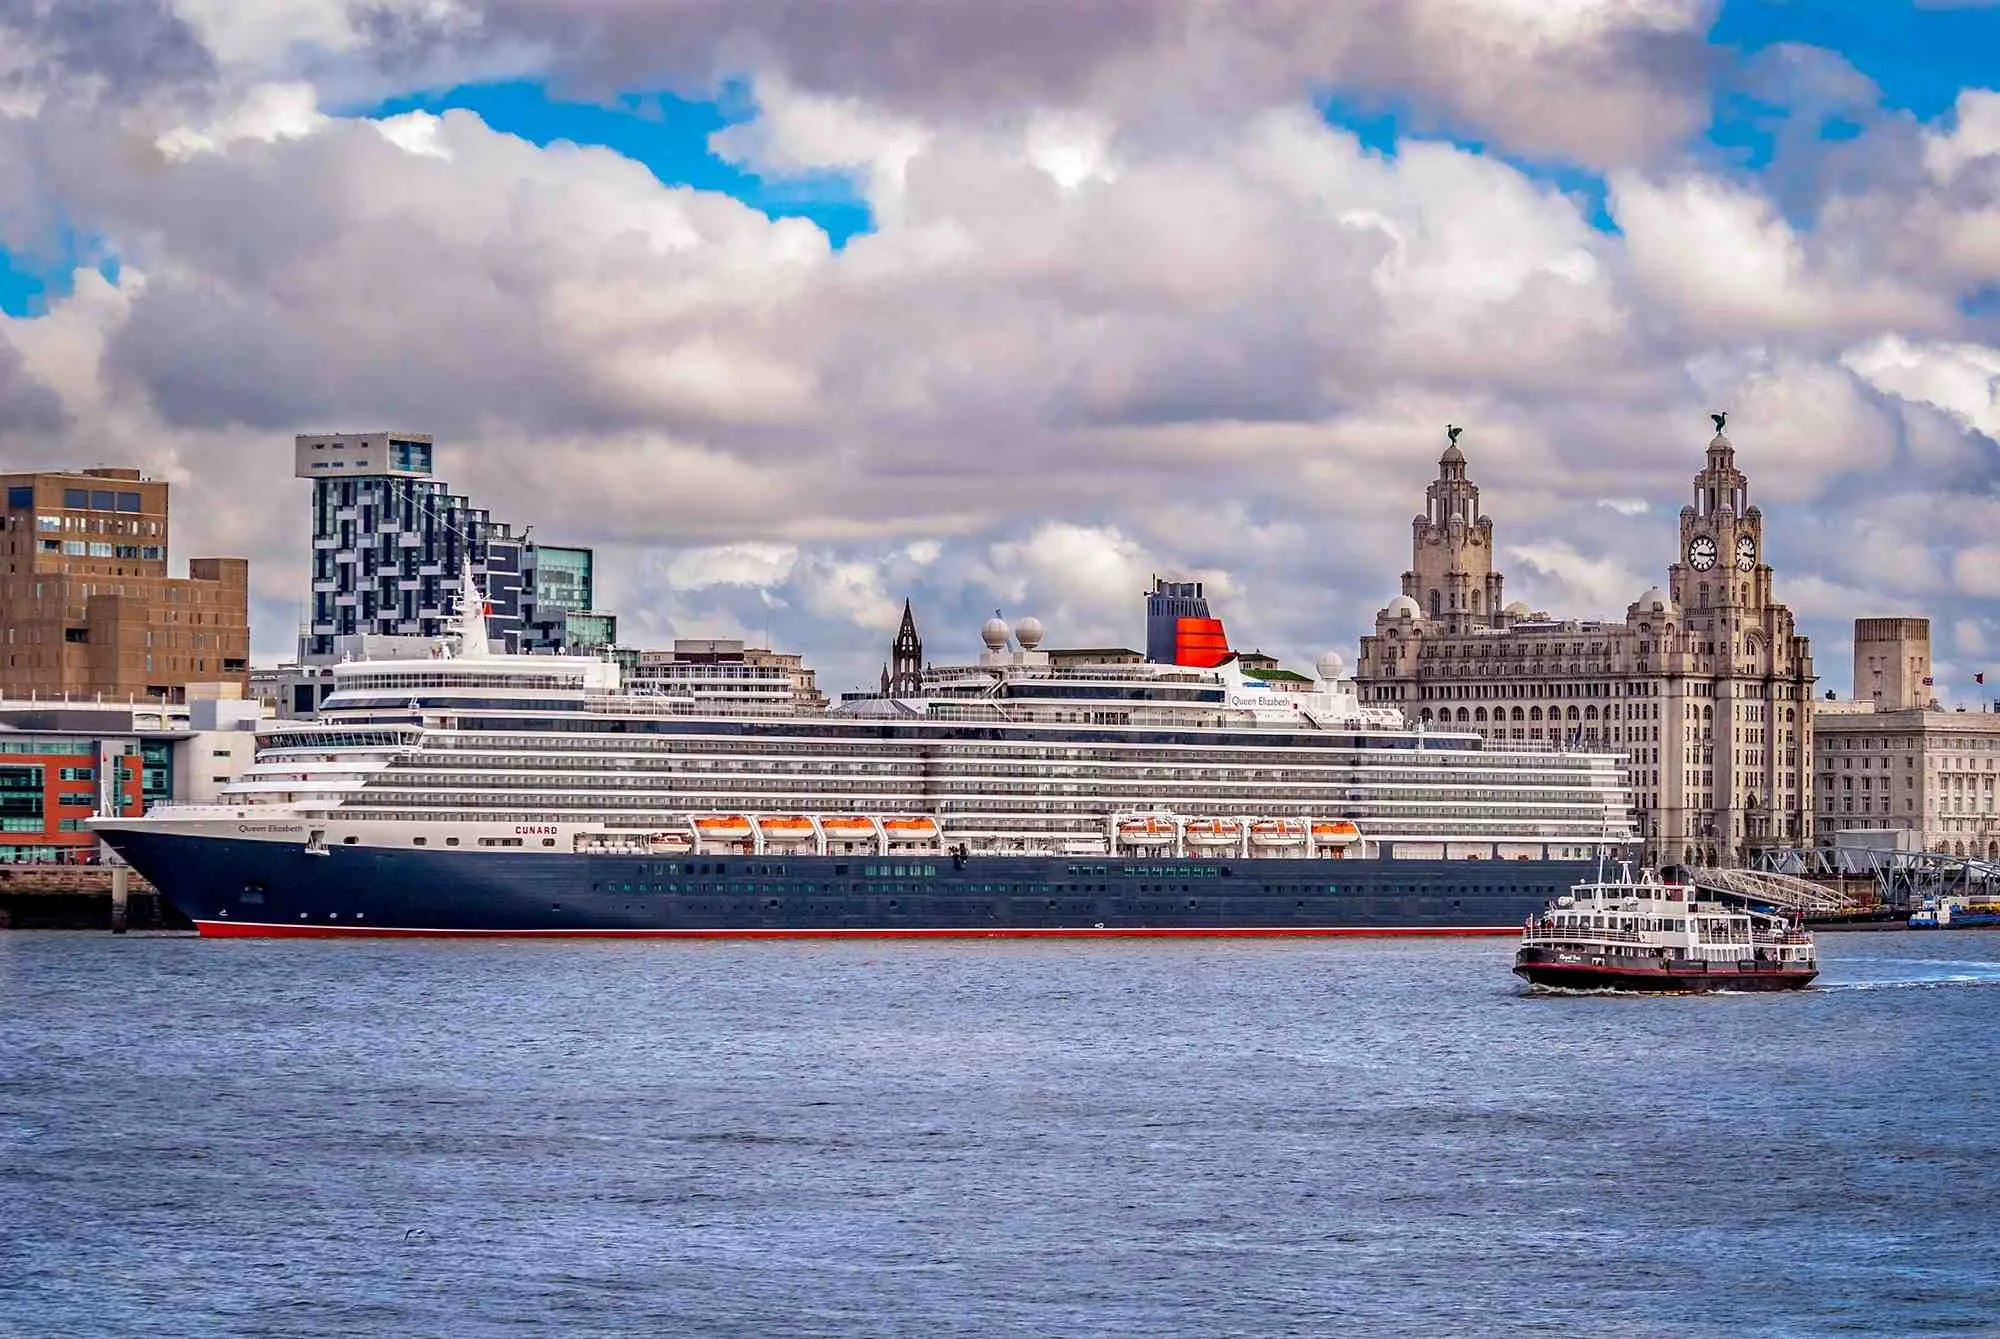 Learn about the history of the waterfront from the audio guide included on the cruise. Get Liverpool River Cruise tickets.